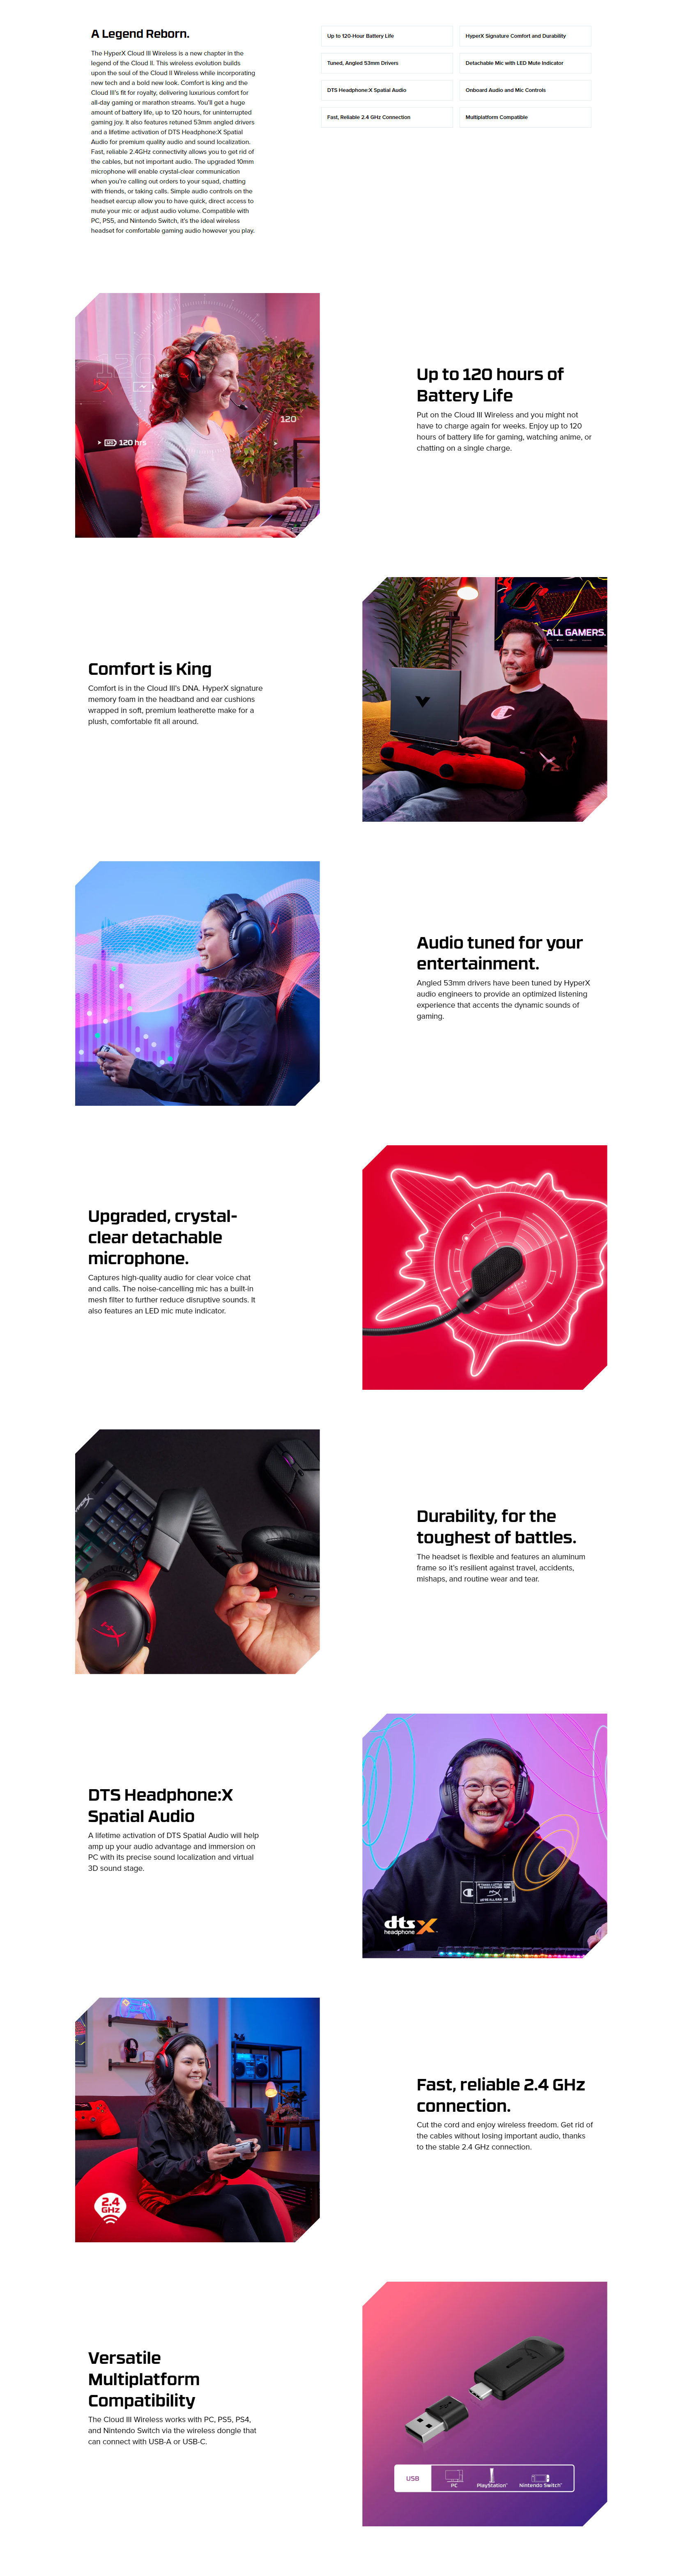 A large marketing image providing additional information about the product HyperX Cloud III - Wireless Gaming Headset (Red) - Additional alt info not provided